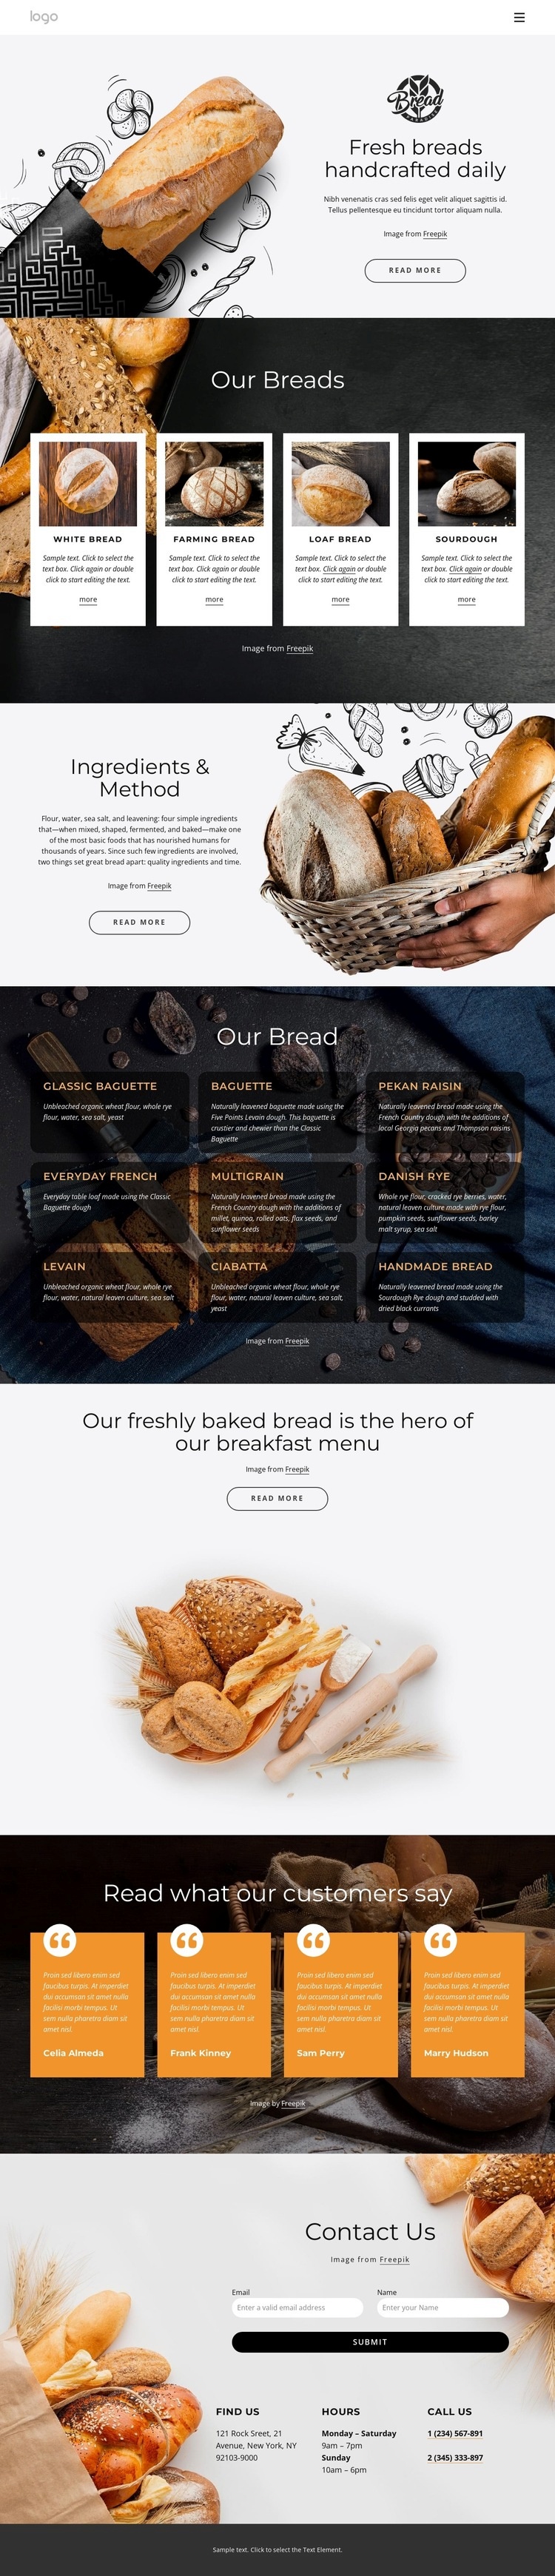 Fresh bread handcrafted every day Homepage Design